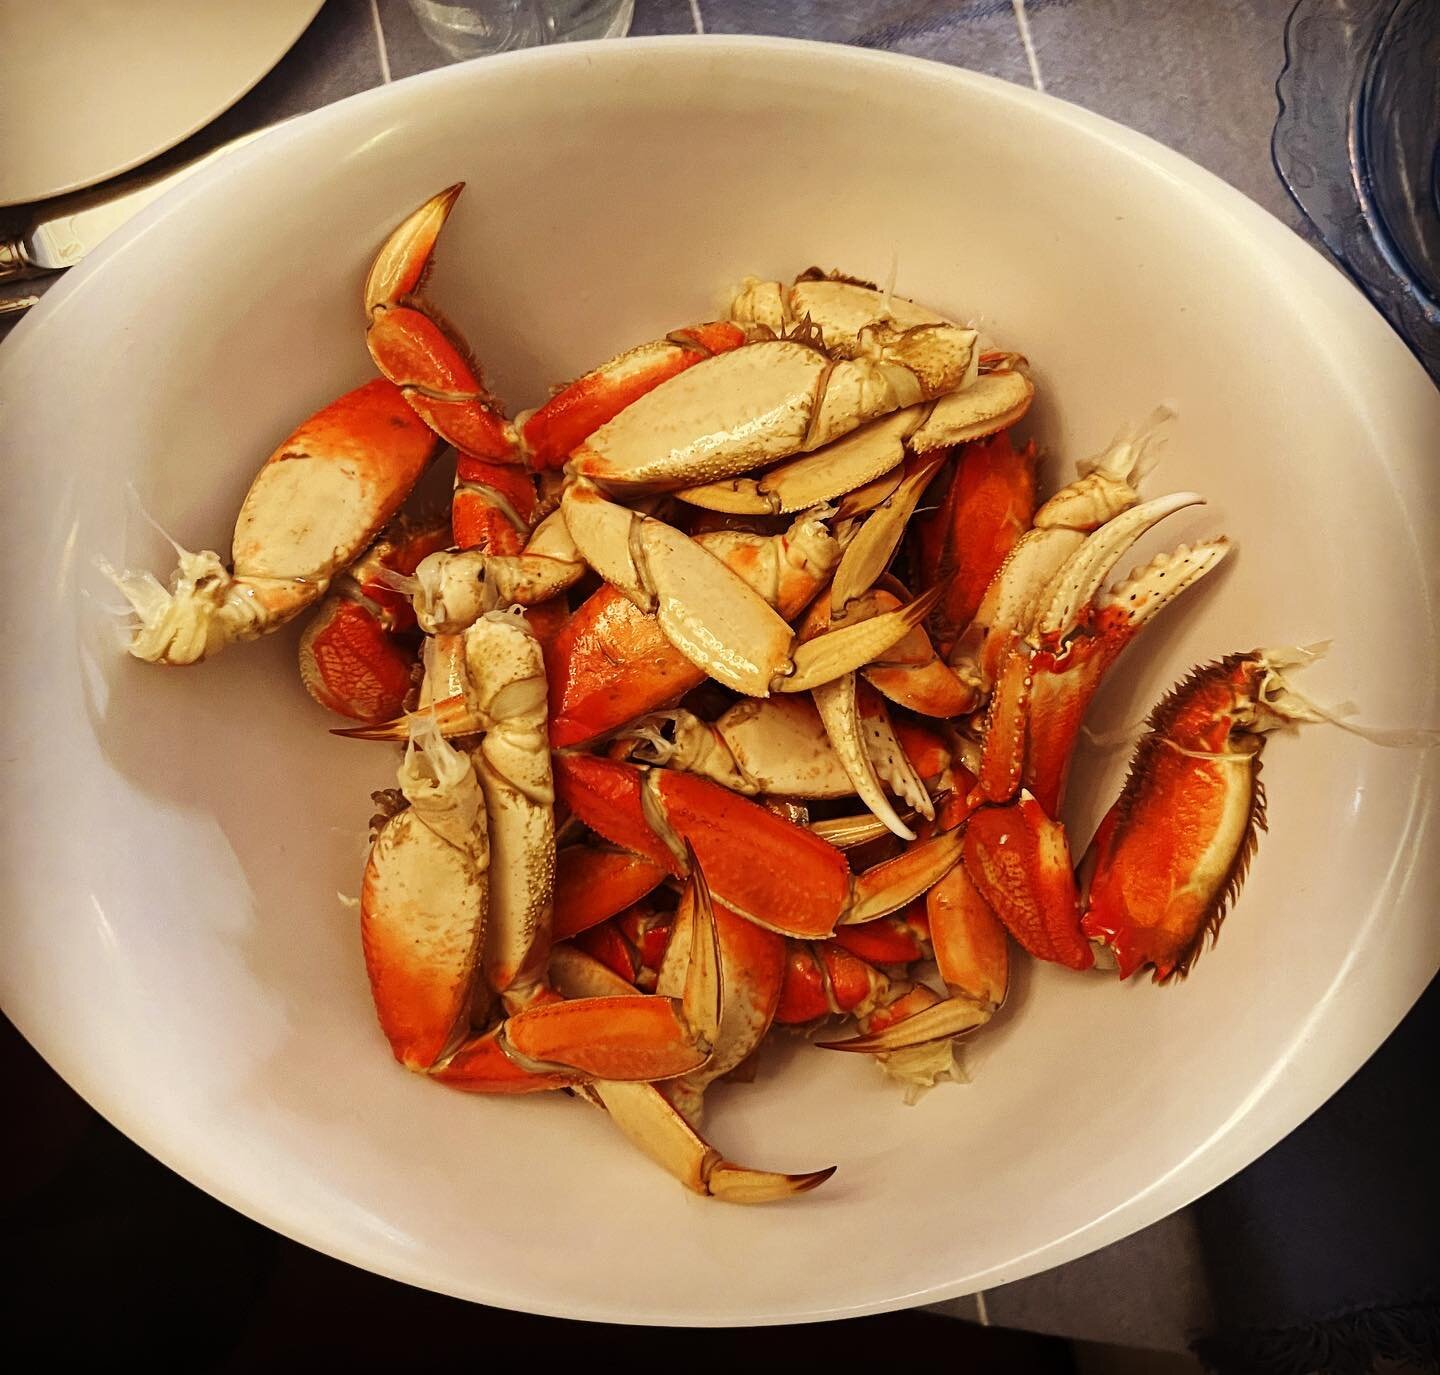 Good old fashion #oregoncoast #greekstylefood #crabcrackin Amazing fresh big #crabs from @thefishpeddler : $5.95 a lb! Served with #greeksalad #humous @boulangerschatnoir  #blackpepper + #confitgarlic #buttercandle house made #sourdoughchiabatta